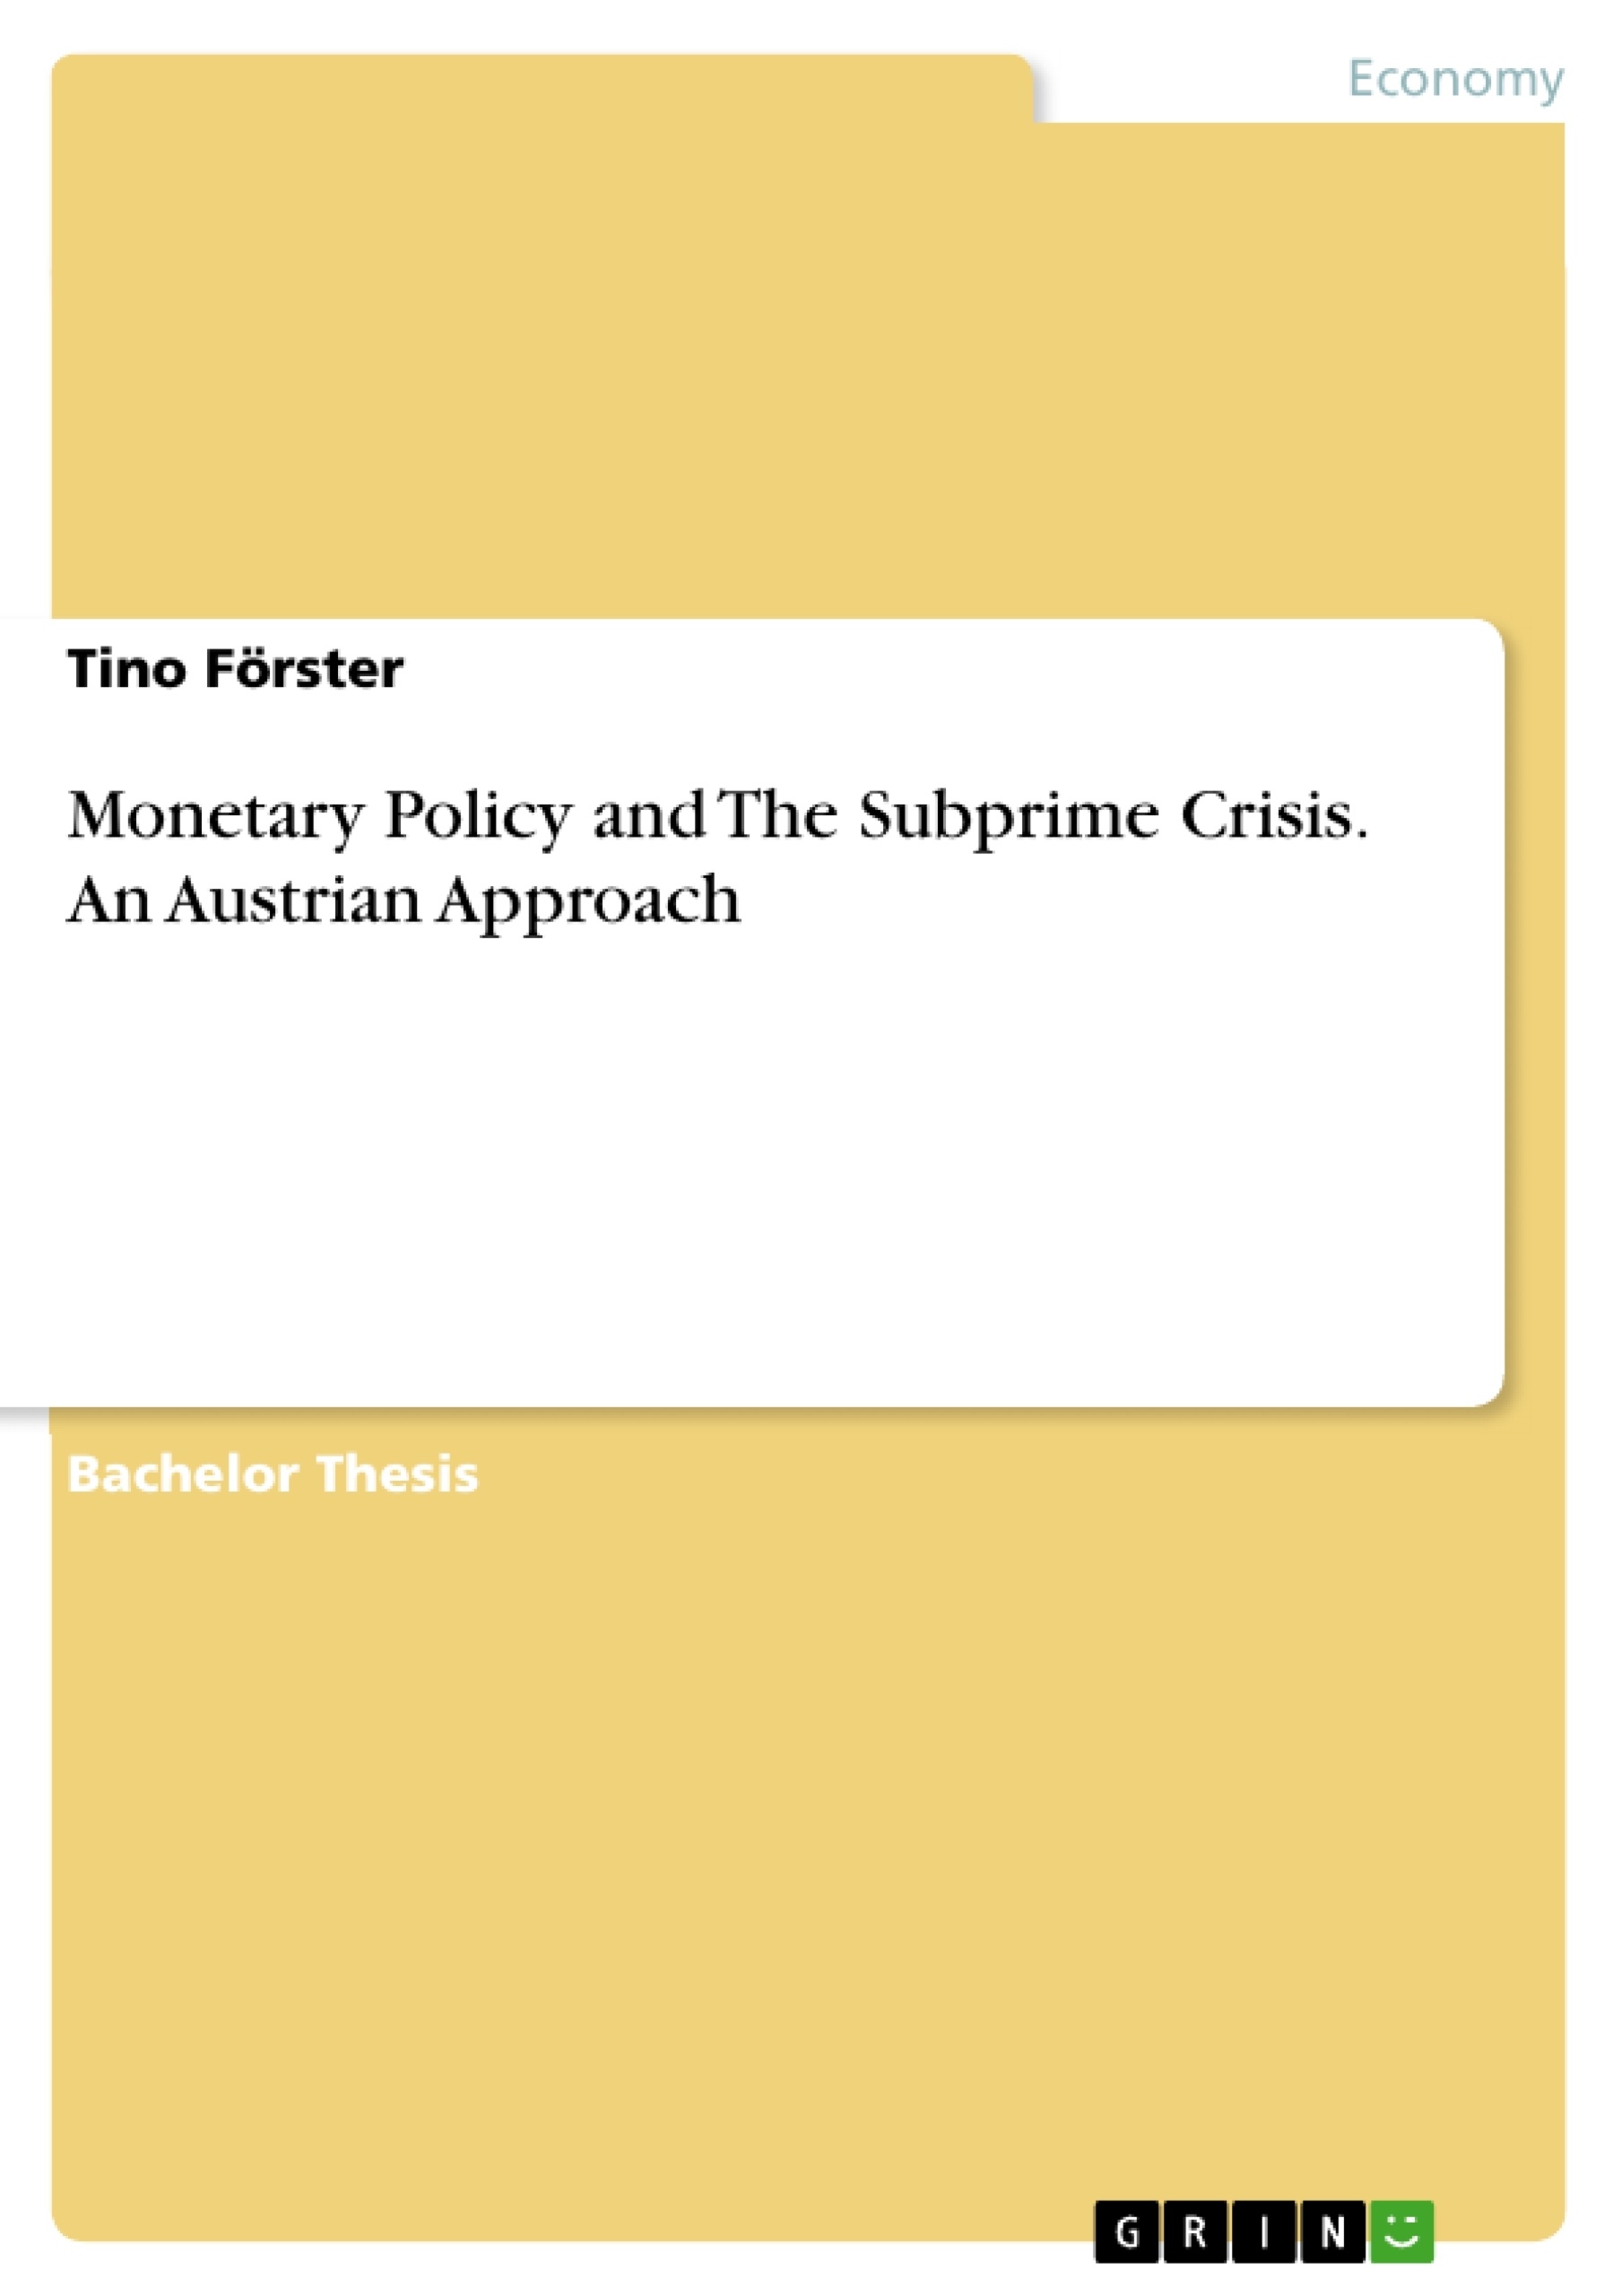 Title: Monetary Policy and The Subprime Crisis. An Austrian Approach